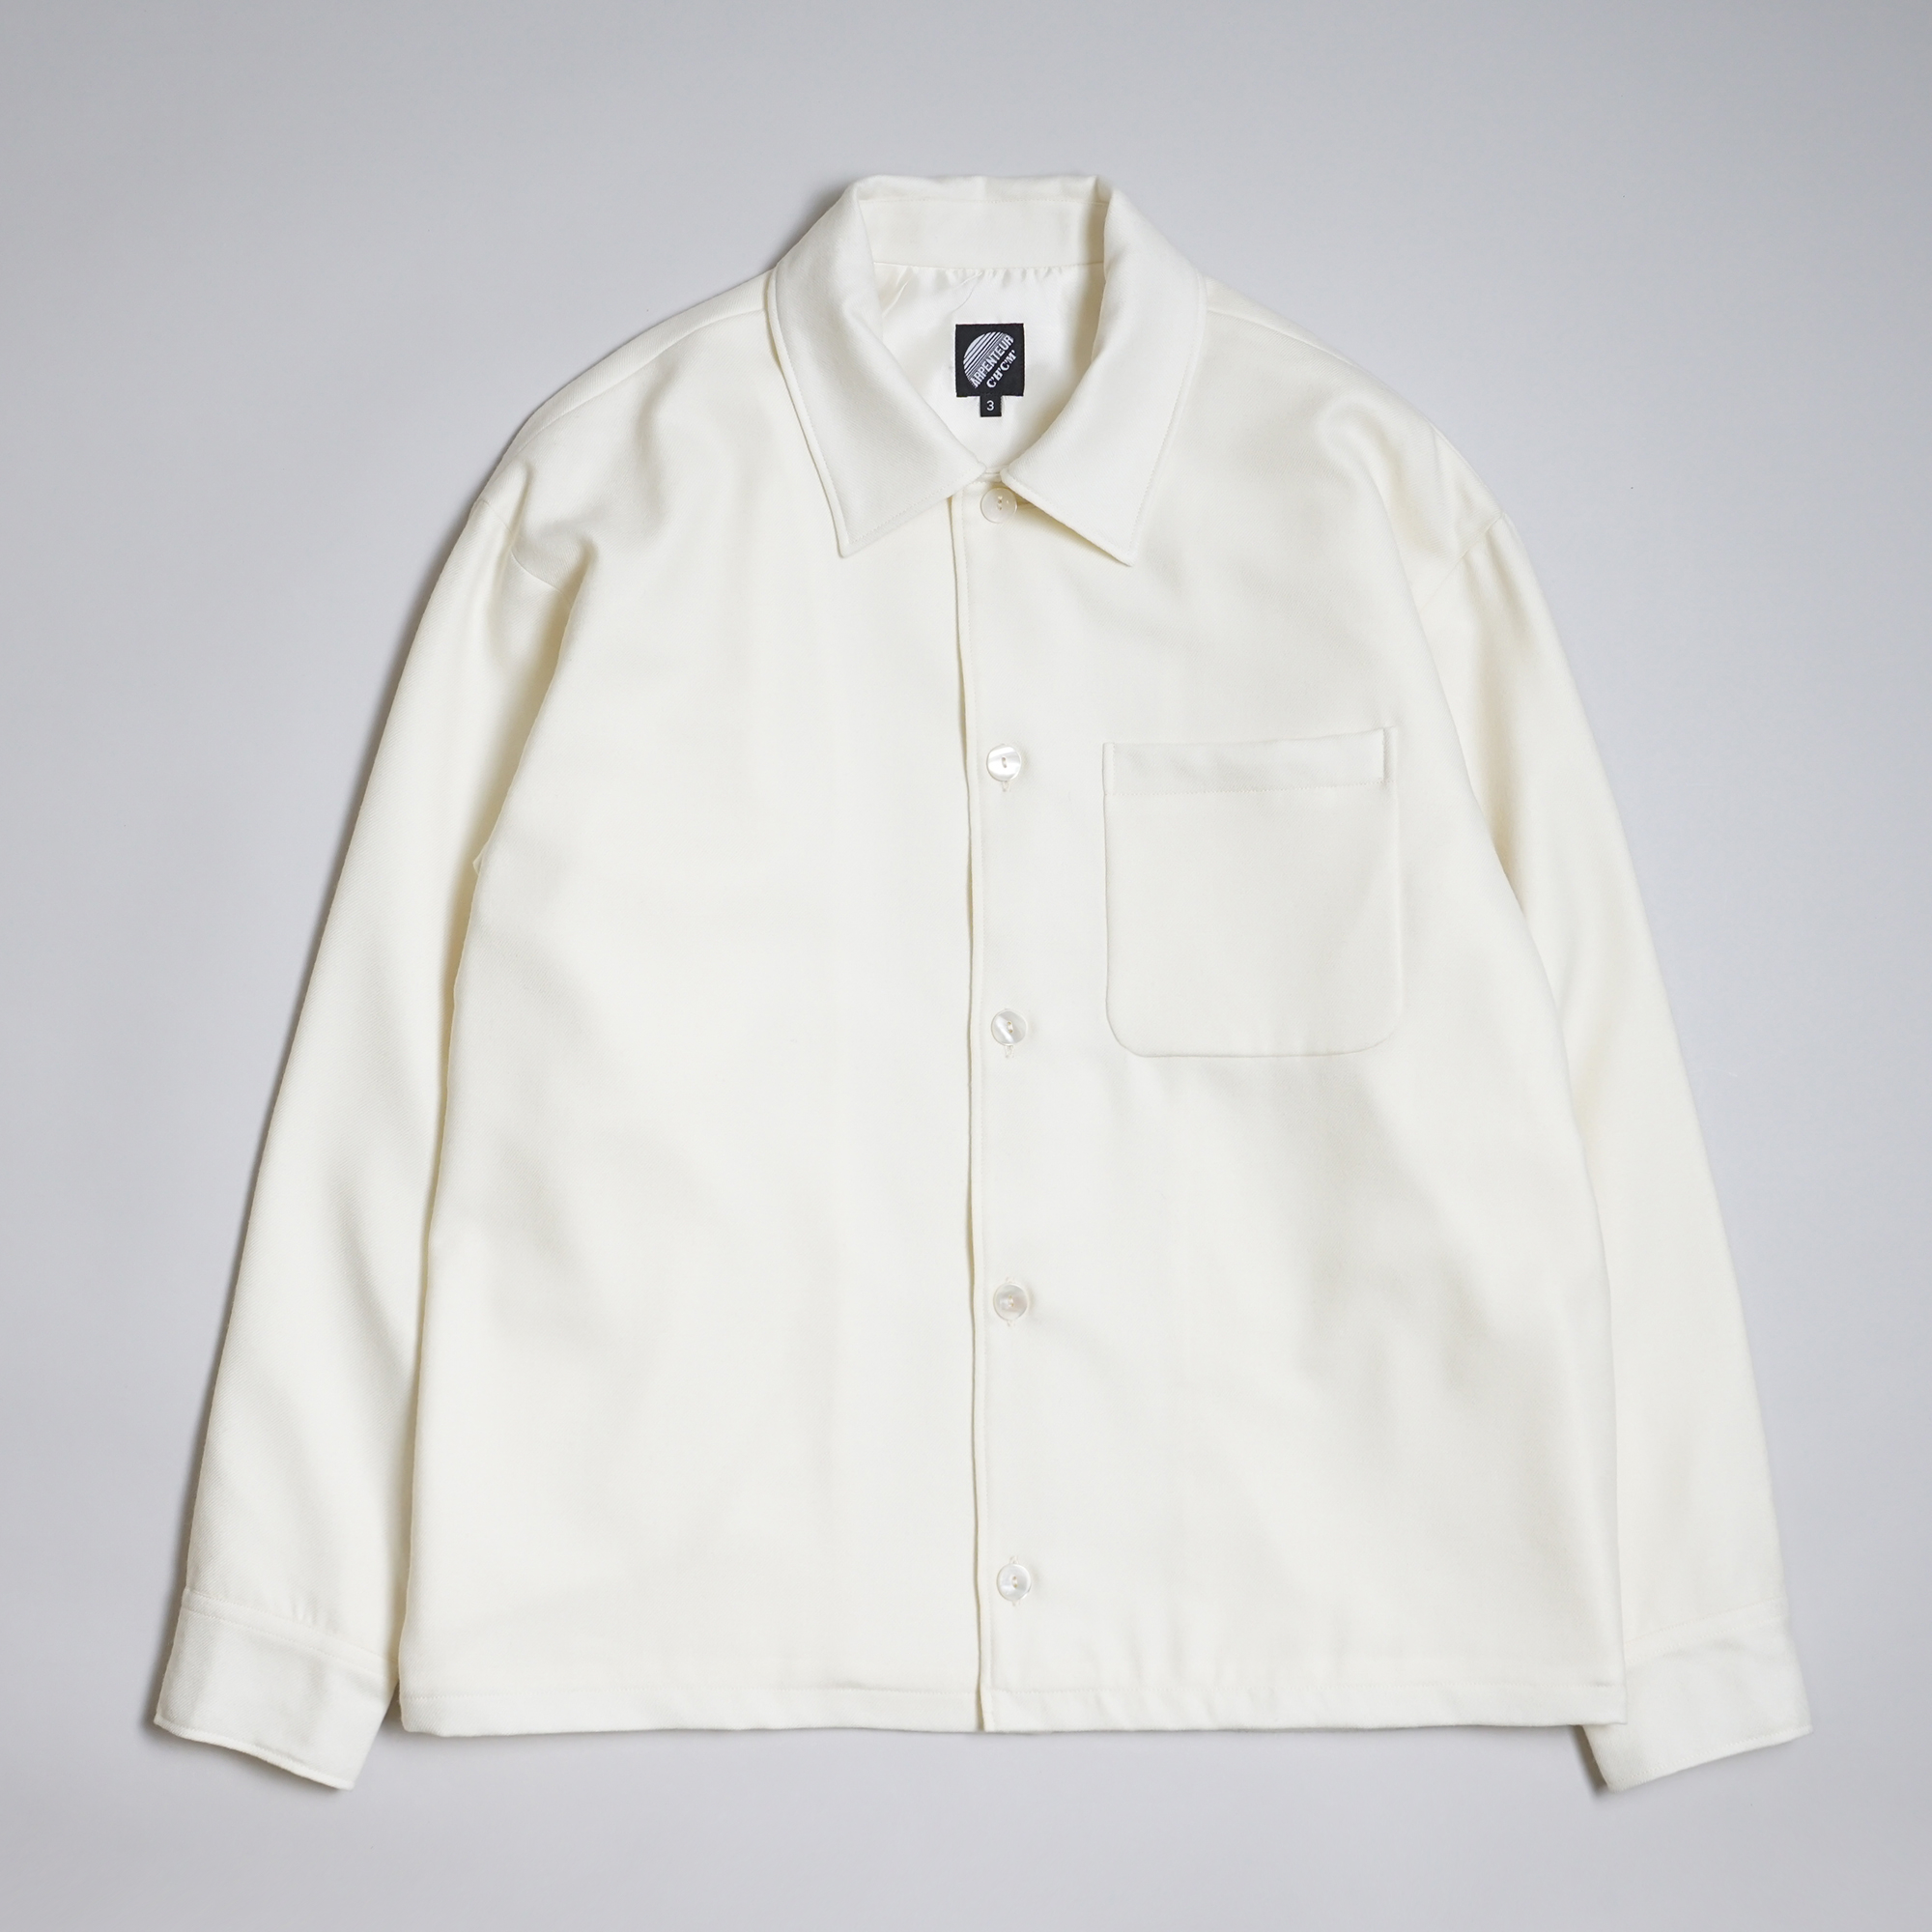 Night Jacket in Ivory color by Arpenteur for C'H'C'M'